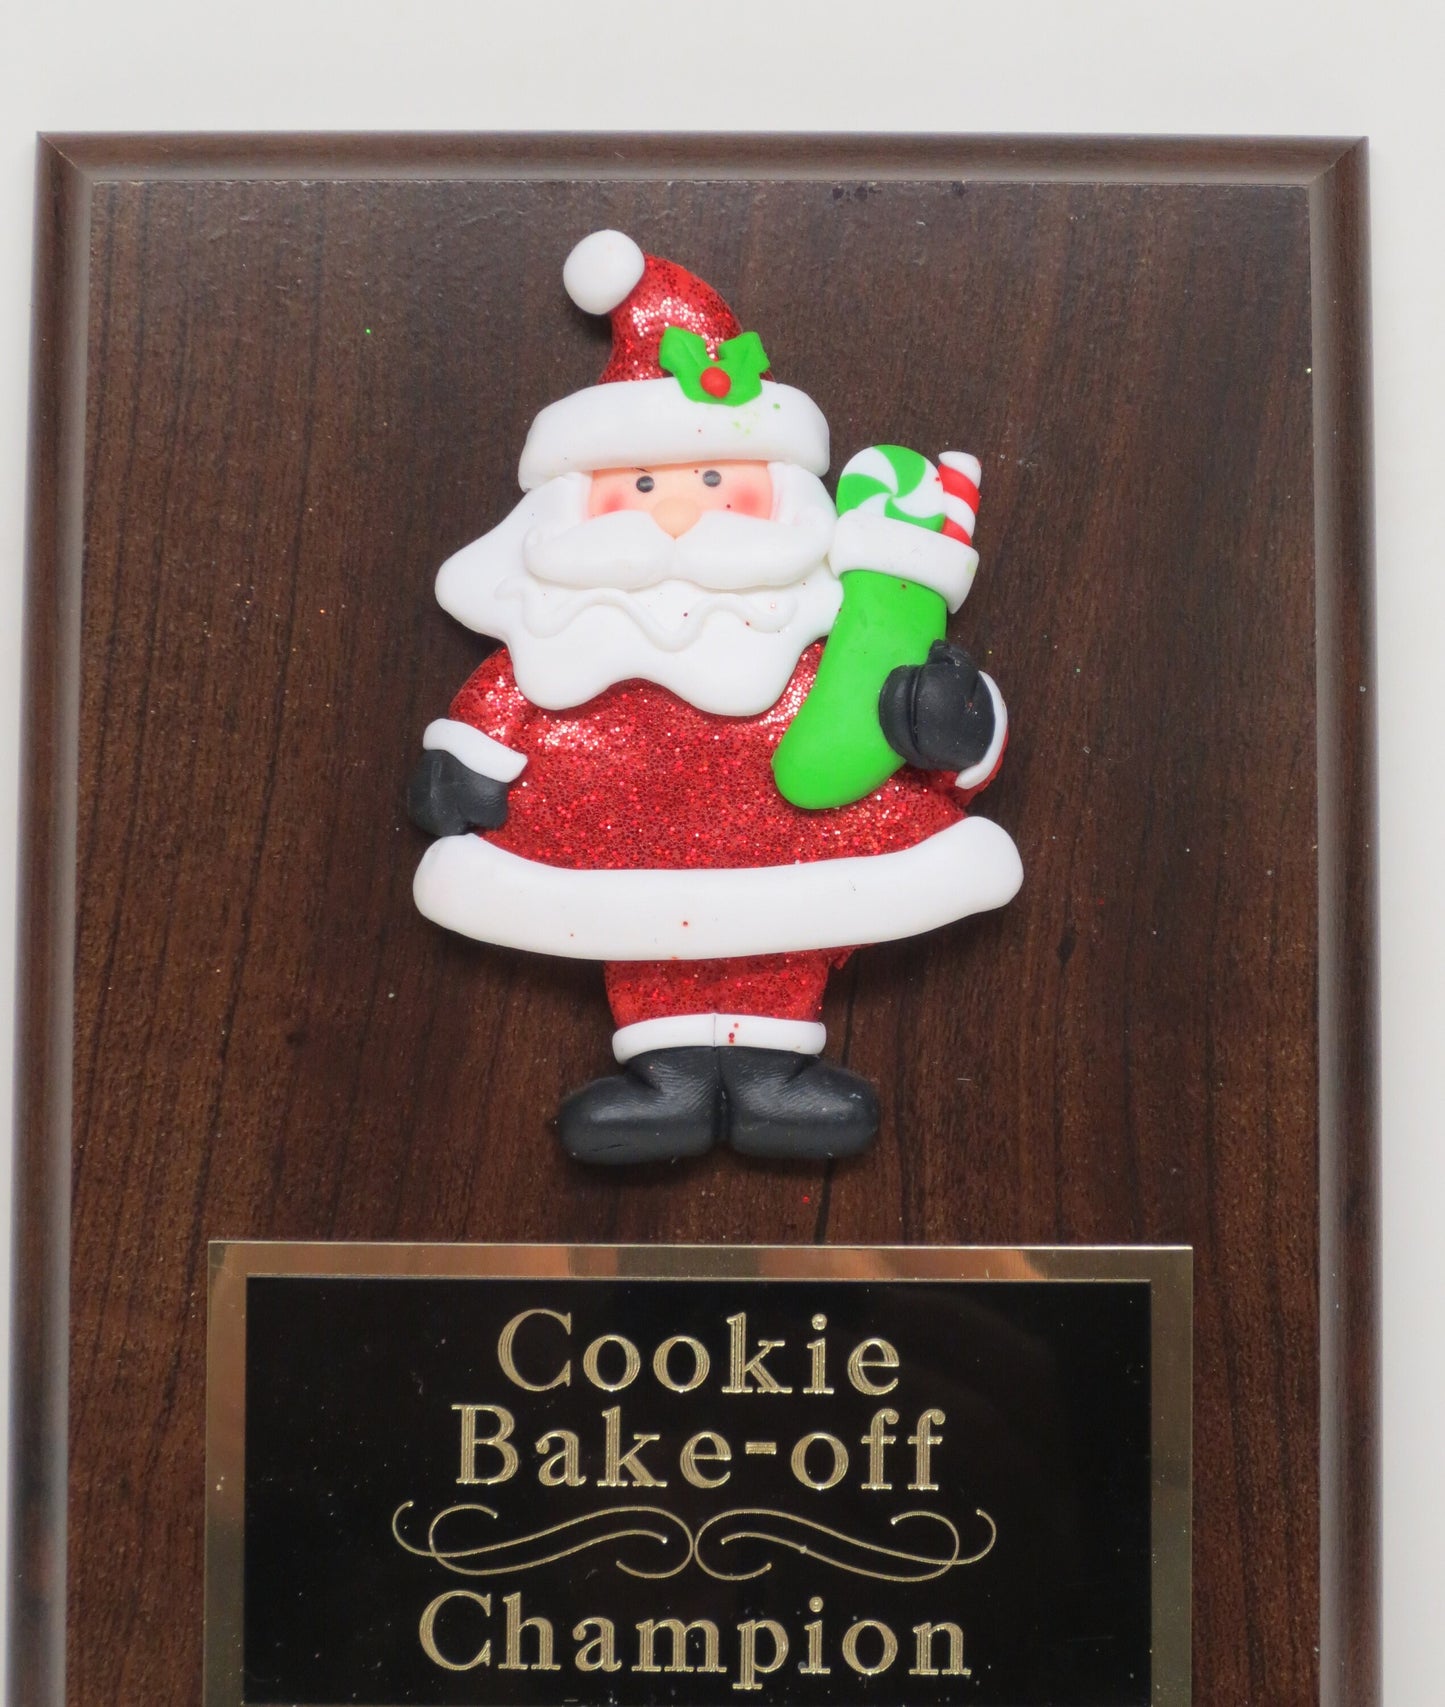 Ugly Sweater Trophy Plaque Stocking Santa Best Decorated Door Office House Gingerbread Cookie Bake Off Contest Holiday Christmas Decor